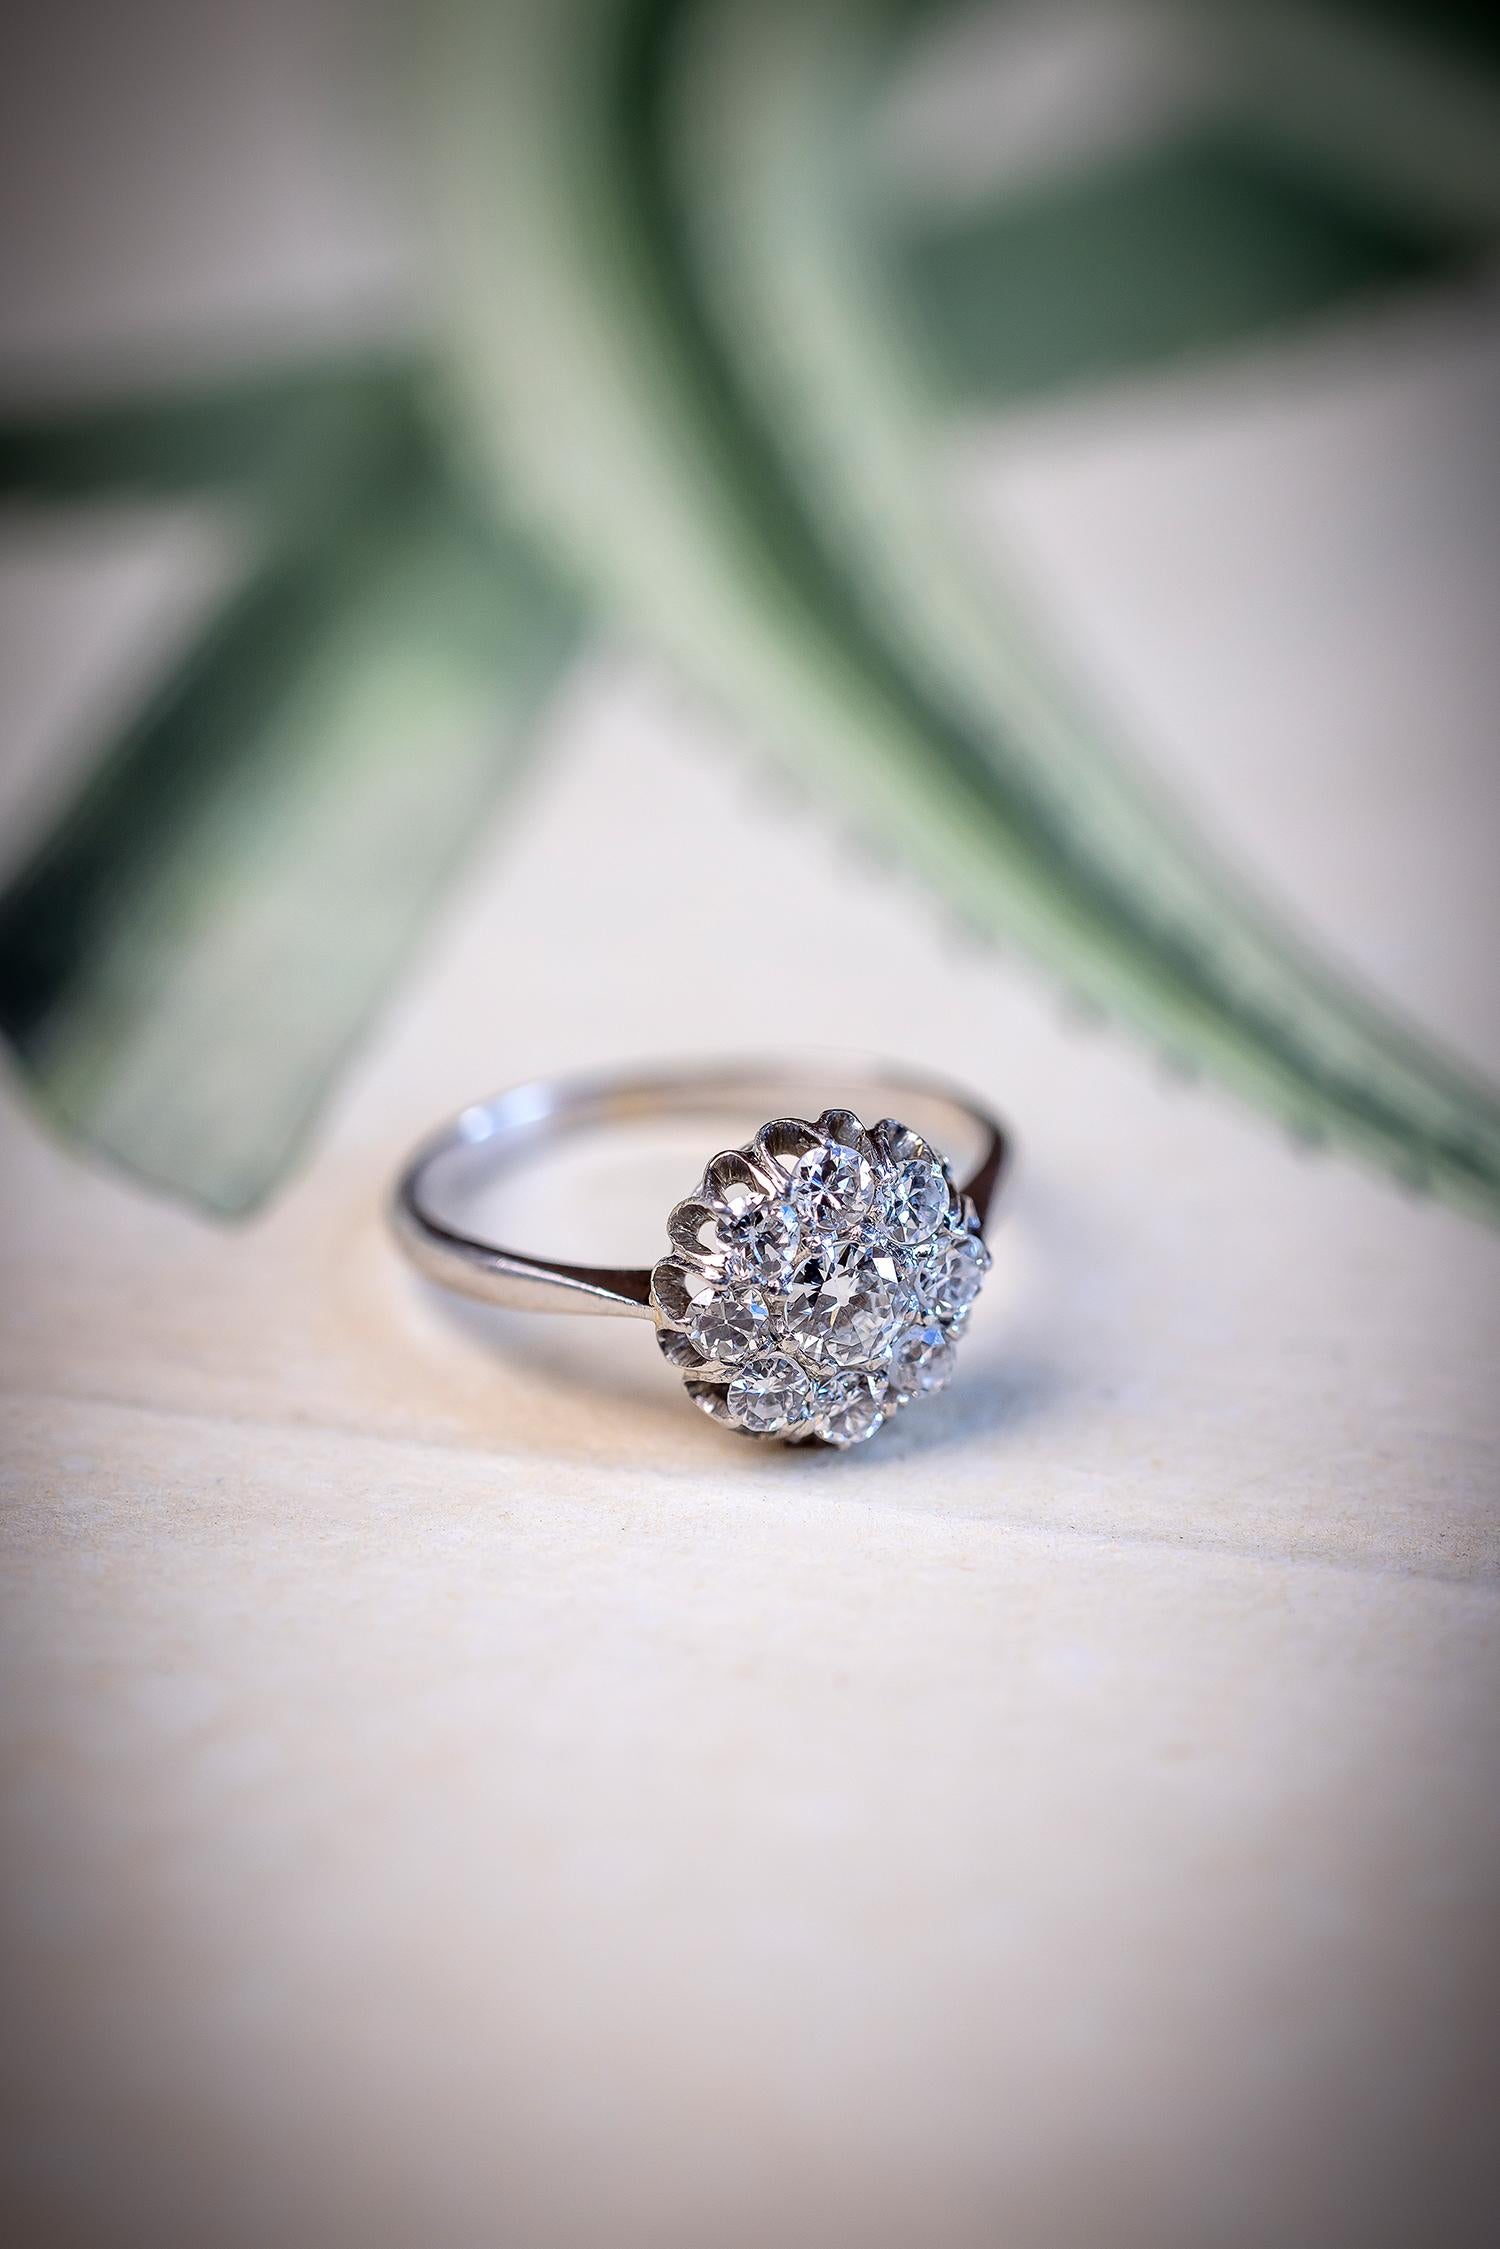 Dating from the early 20th century and so charming. Whether worn as a cocktail ring or engagement ring, the spread of this 0.75 carats crispy white old cut diamond cluster ring makes such an impressive statement on the hand. Viewed from the side,